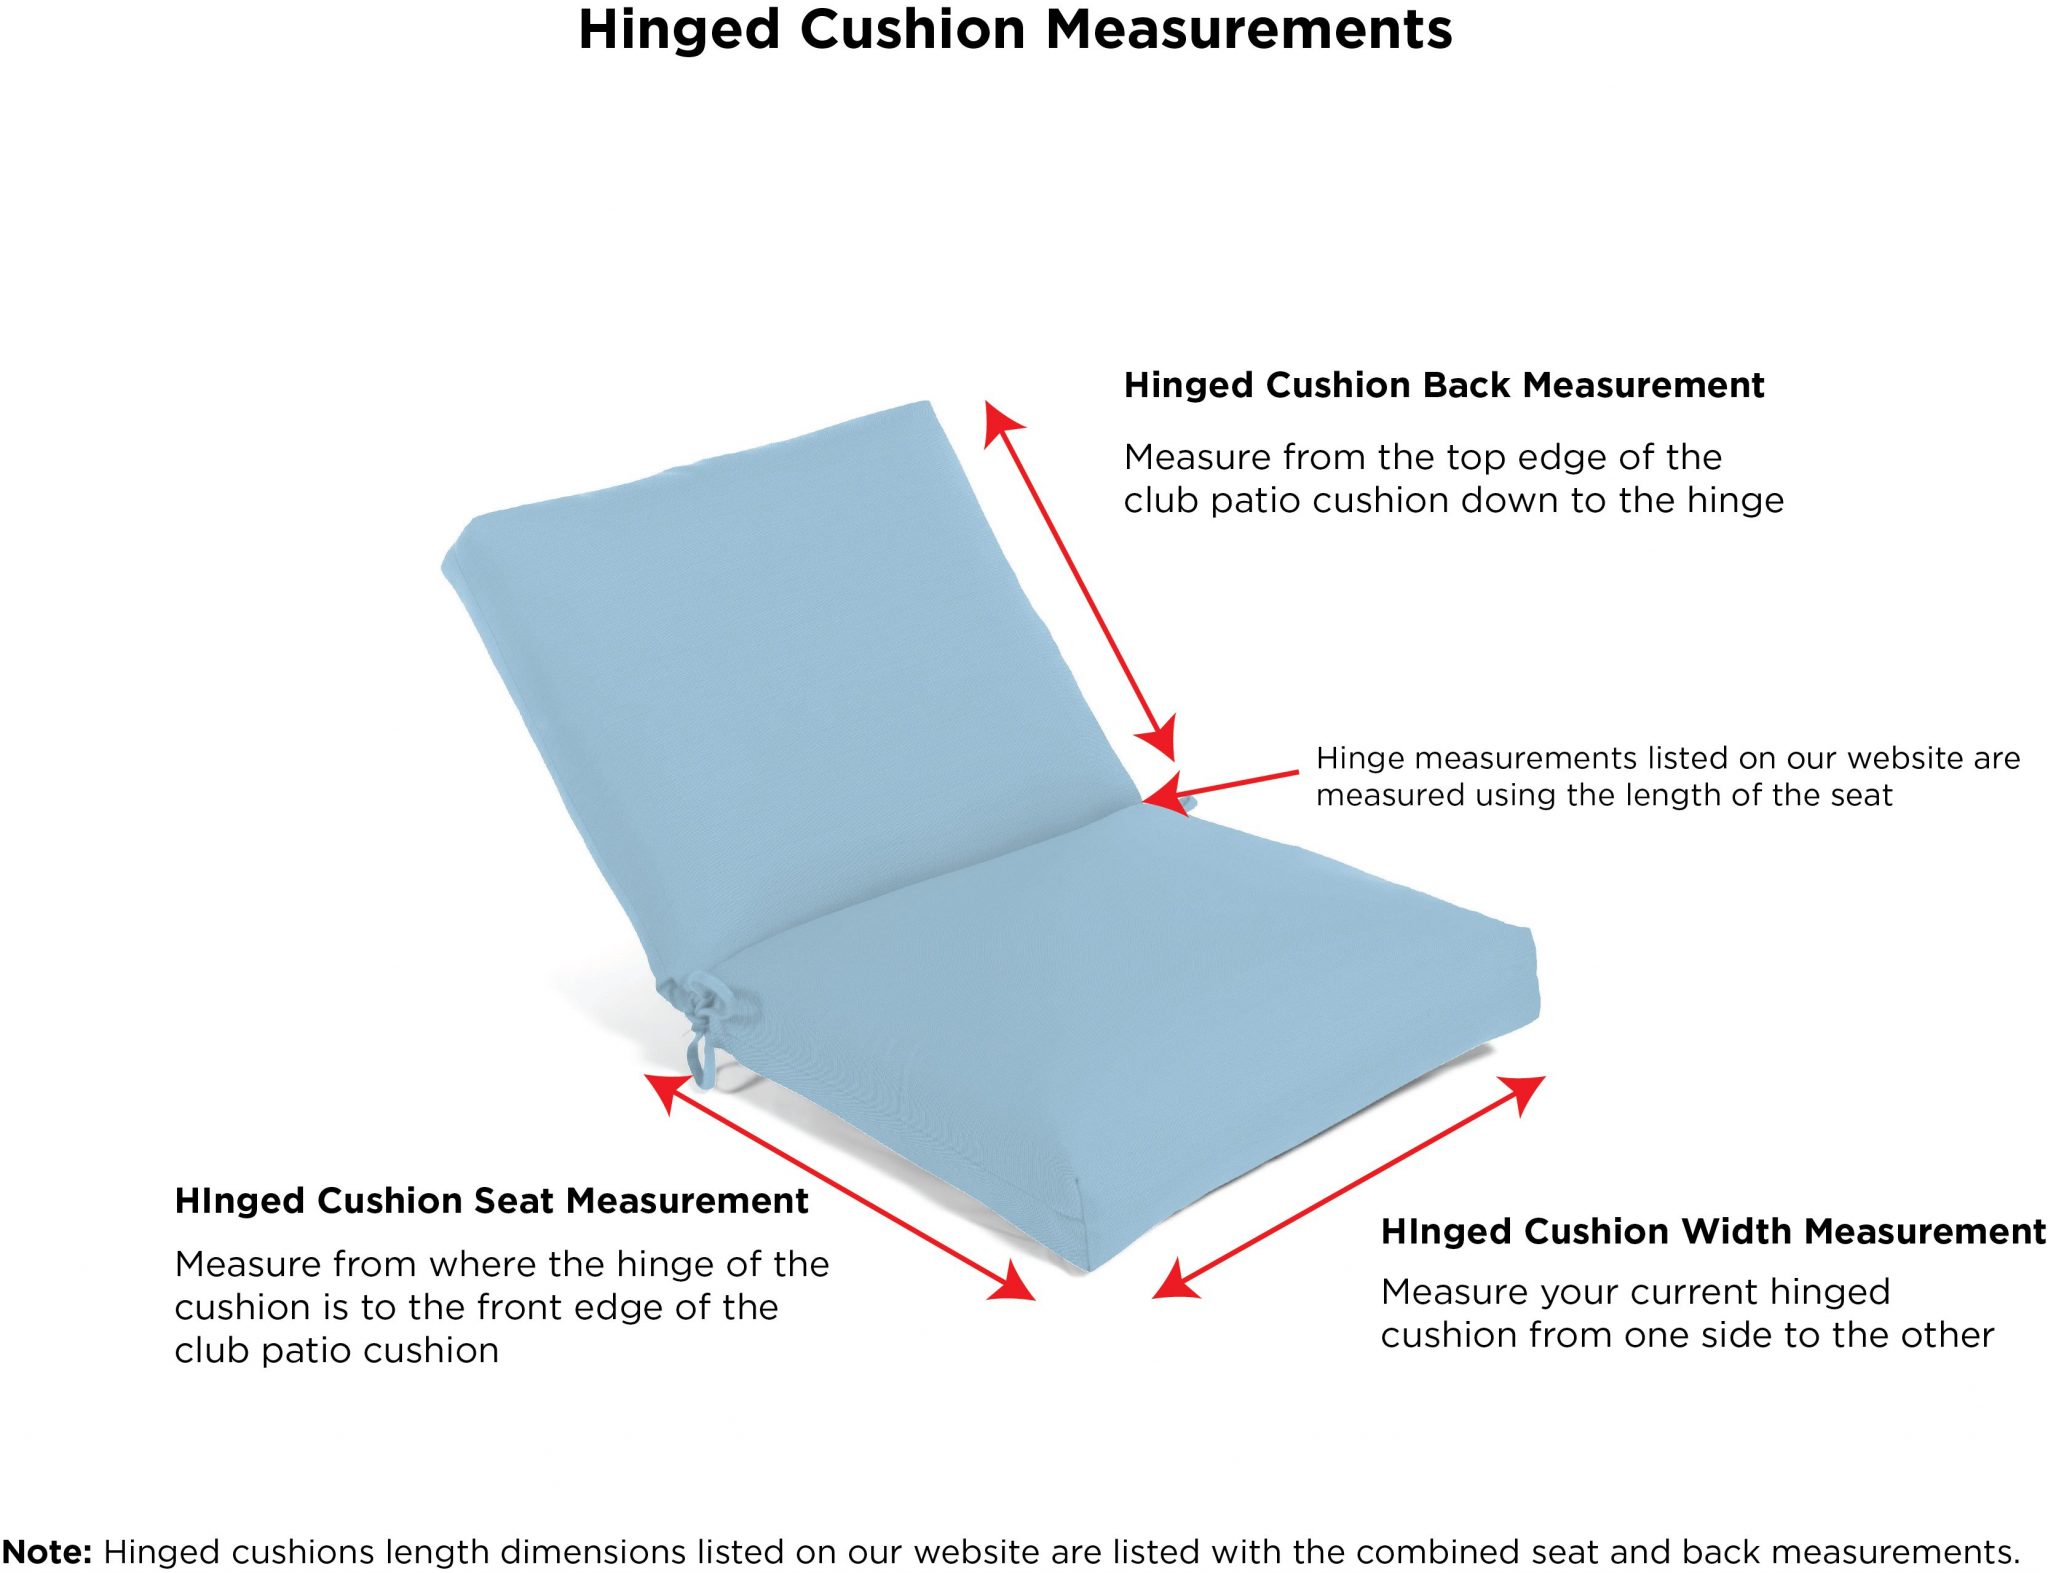 https://www.cushionconnection.com/wp-content/uploads/2021/02/How-to-Measure-Hinged-Cushions.jpg